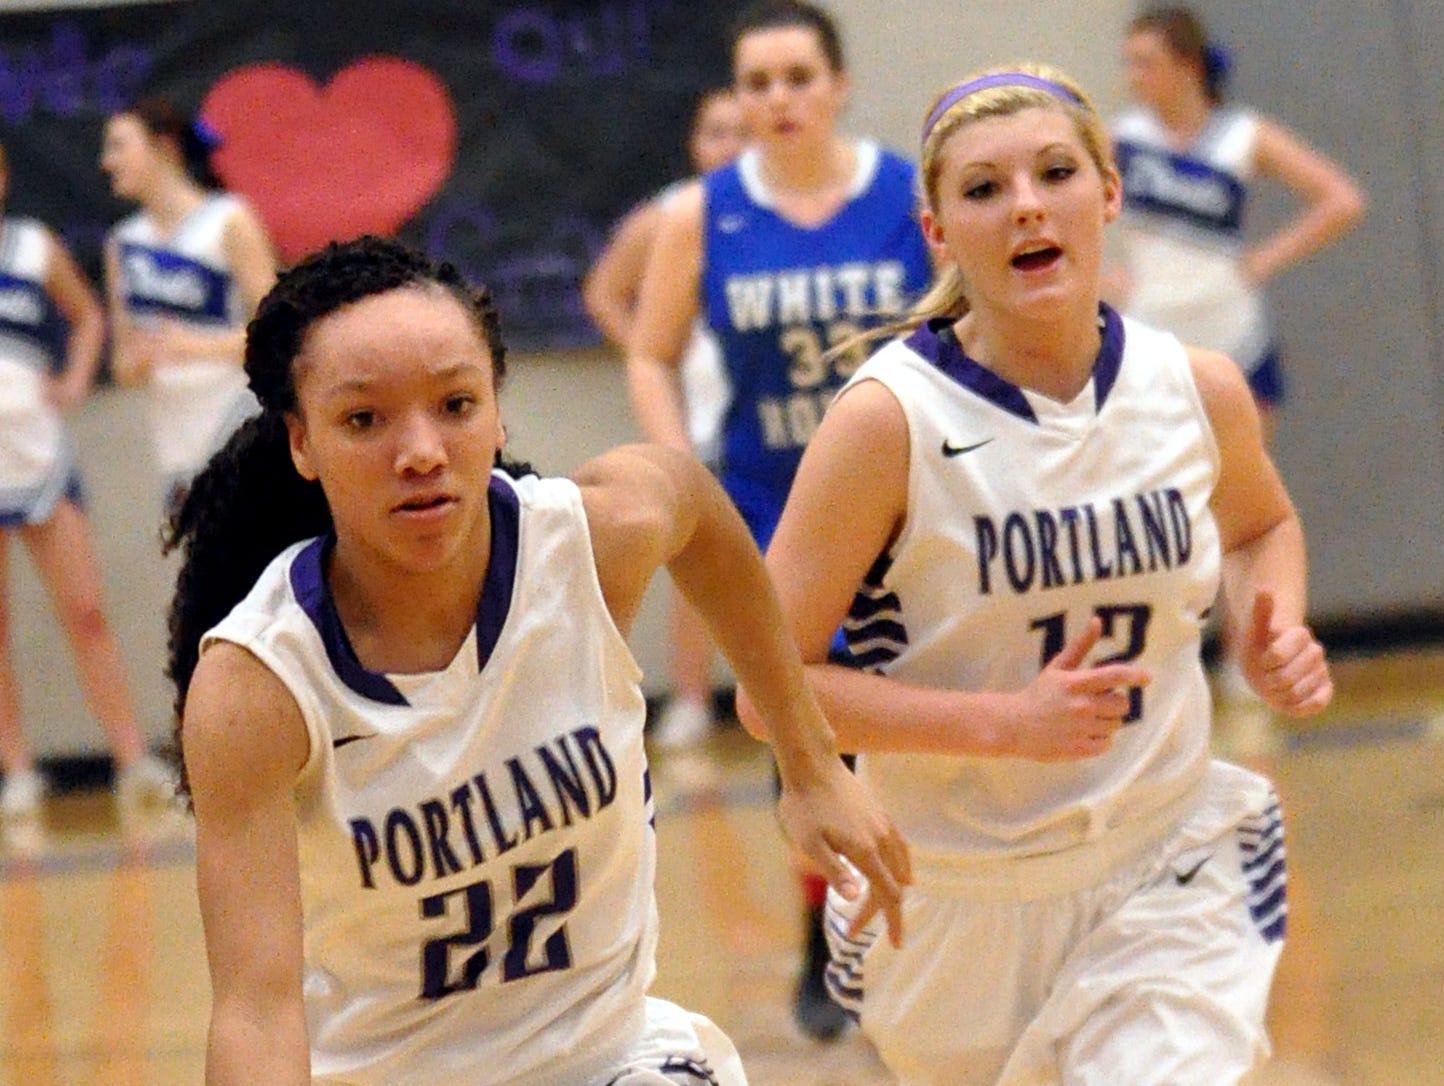 Portland High sophomore guard Demaira Bell was in the starting lineup last season as a freshman.